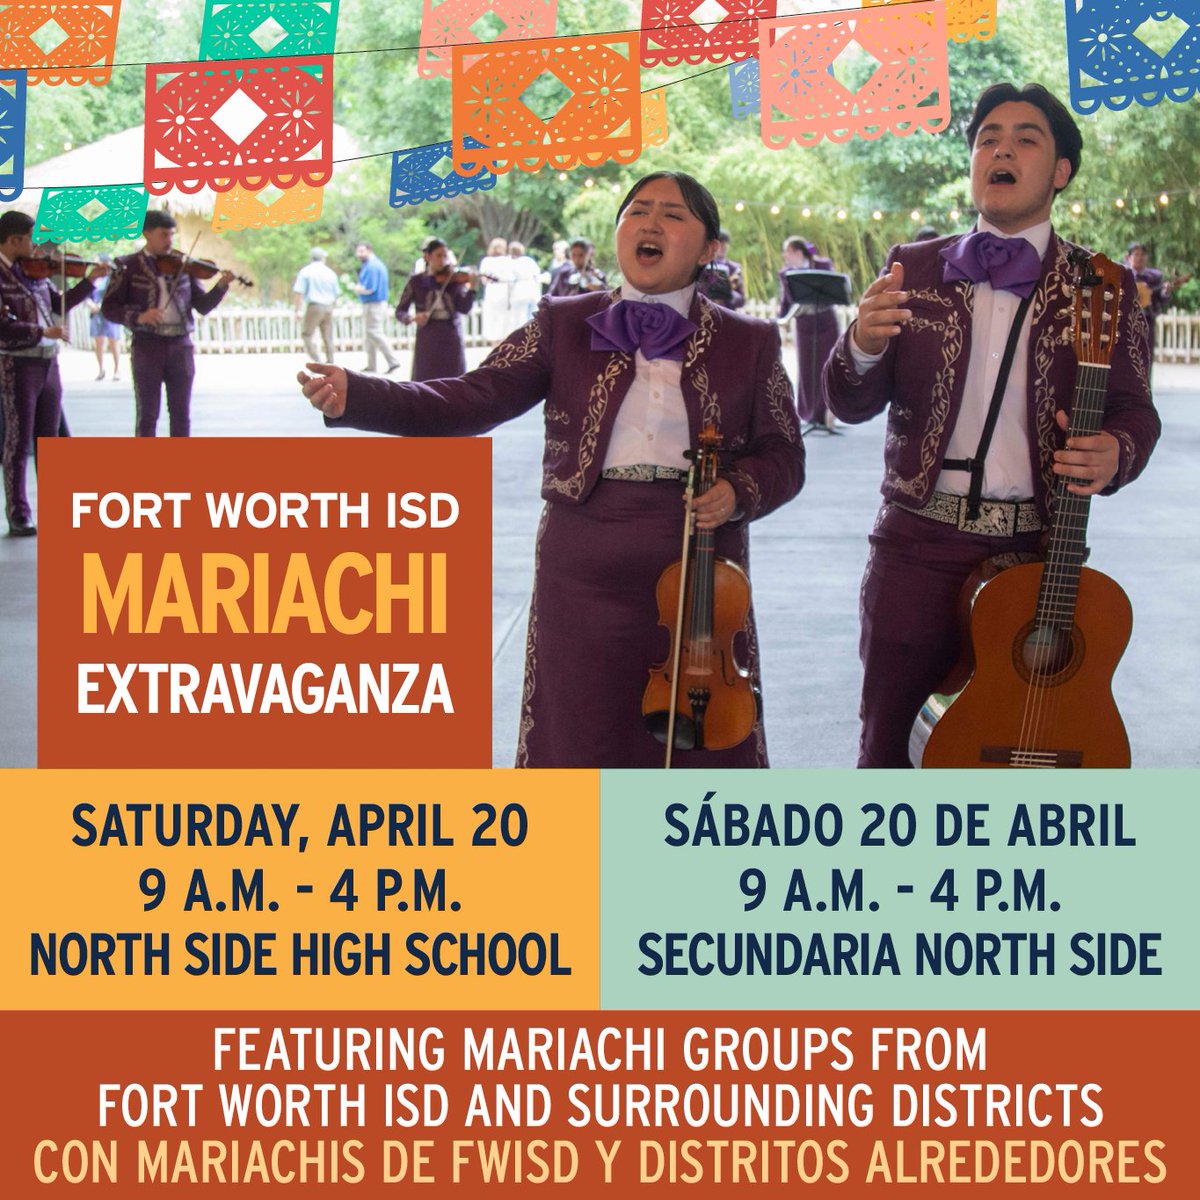 🎶 Mark your calendars for this Saturday, April 20th! 🎉 Join us at North Side High School for a special mariachi event from 9 AM to 4 PM! 🌟 You'll hear amazing mariachi groups from FWISD and nearby schools. It's going to be a blast! Don't miss it! #Mariachi #FWISD 🎺🎻🎶